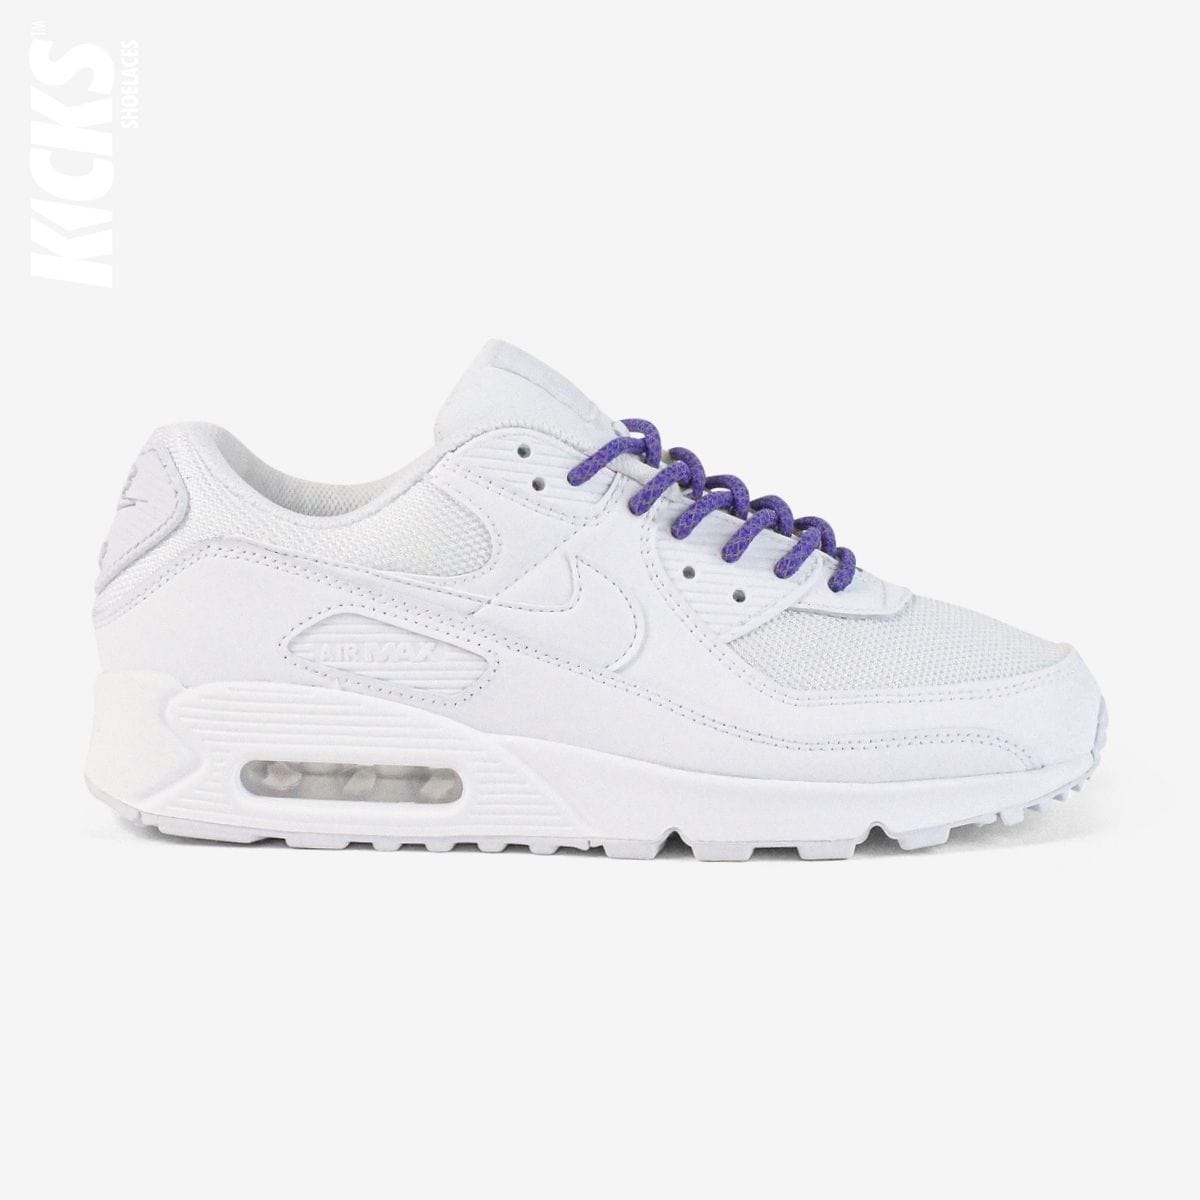 round-laces-in-purple-on-mens-white-shoe